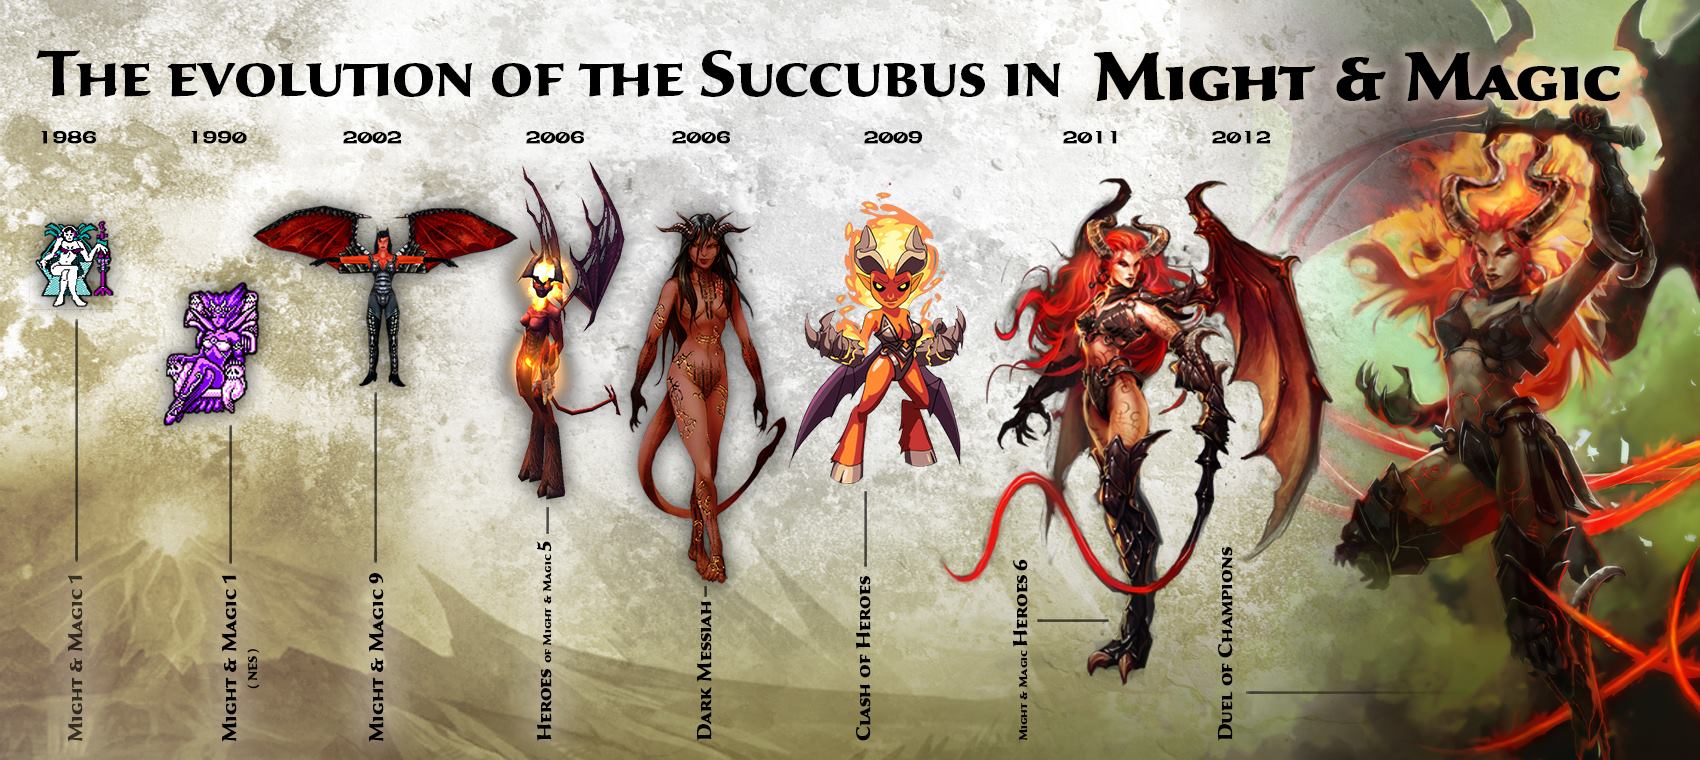 The evolution of the Succubus in Might and Magic